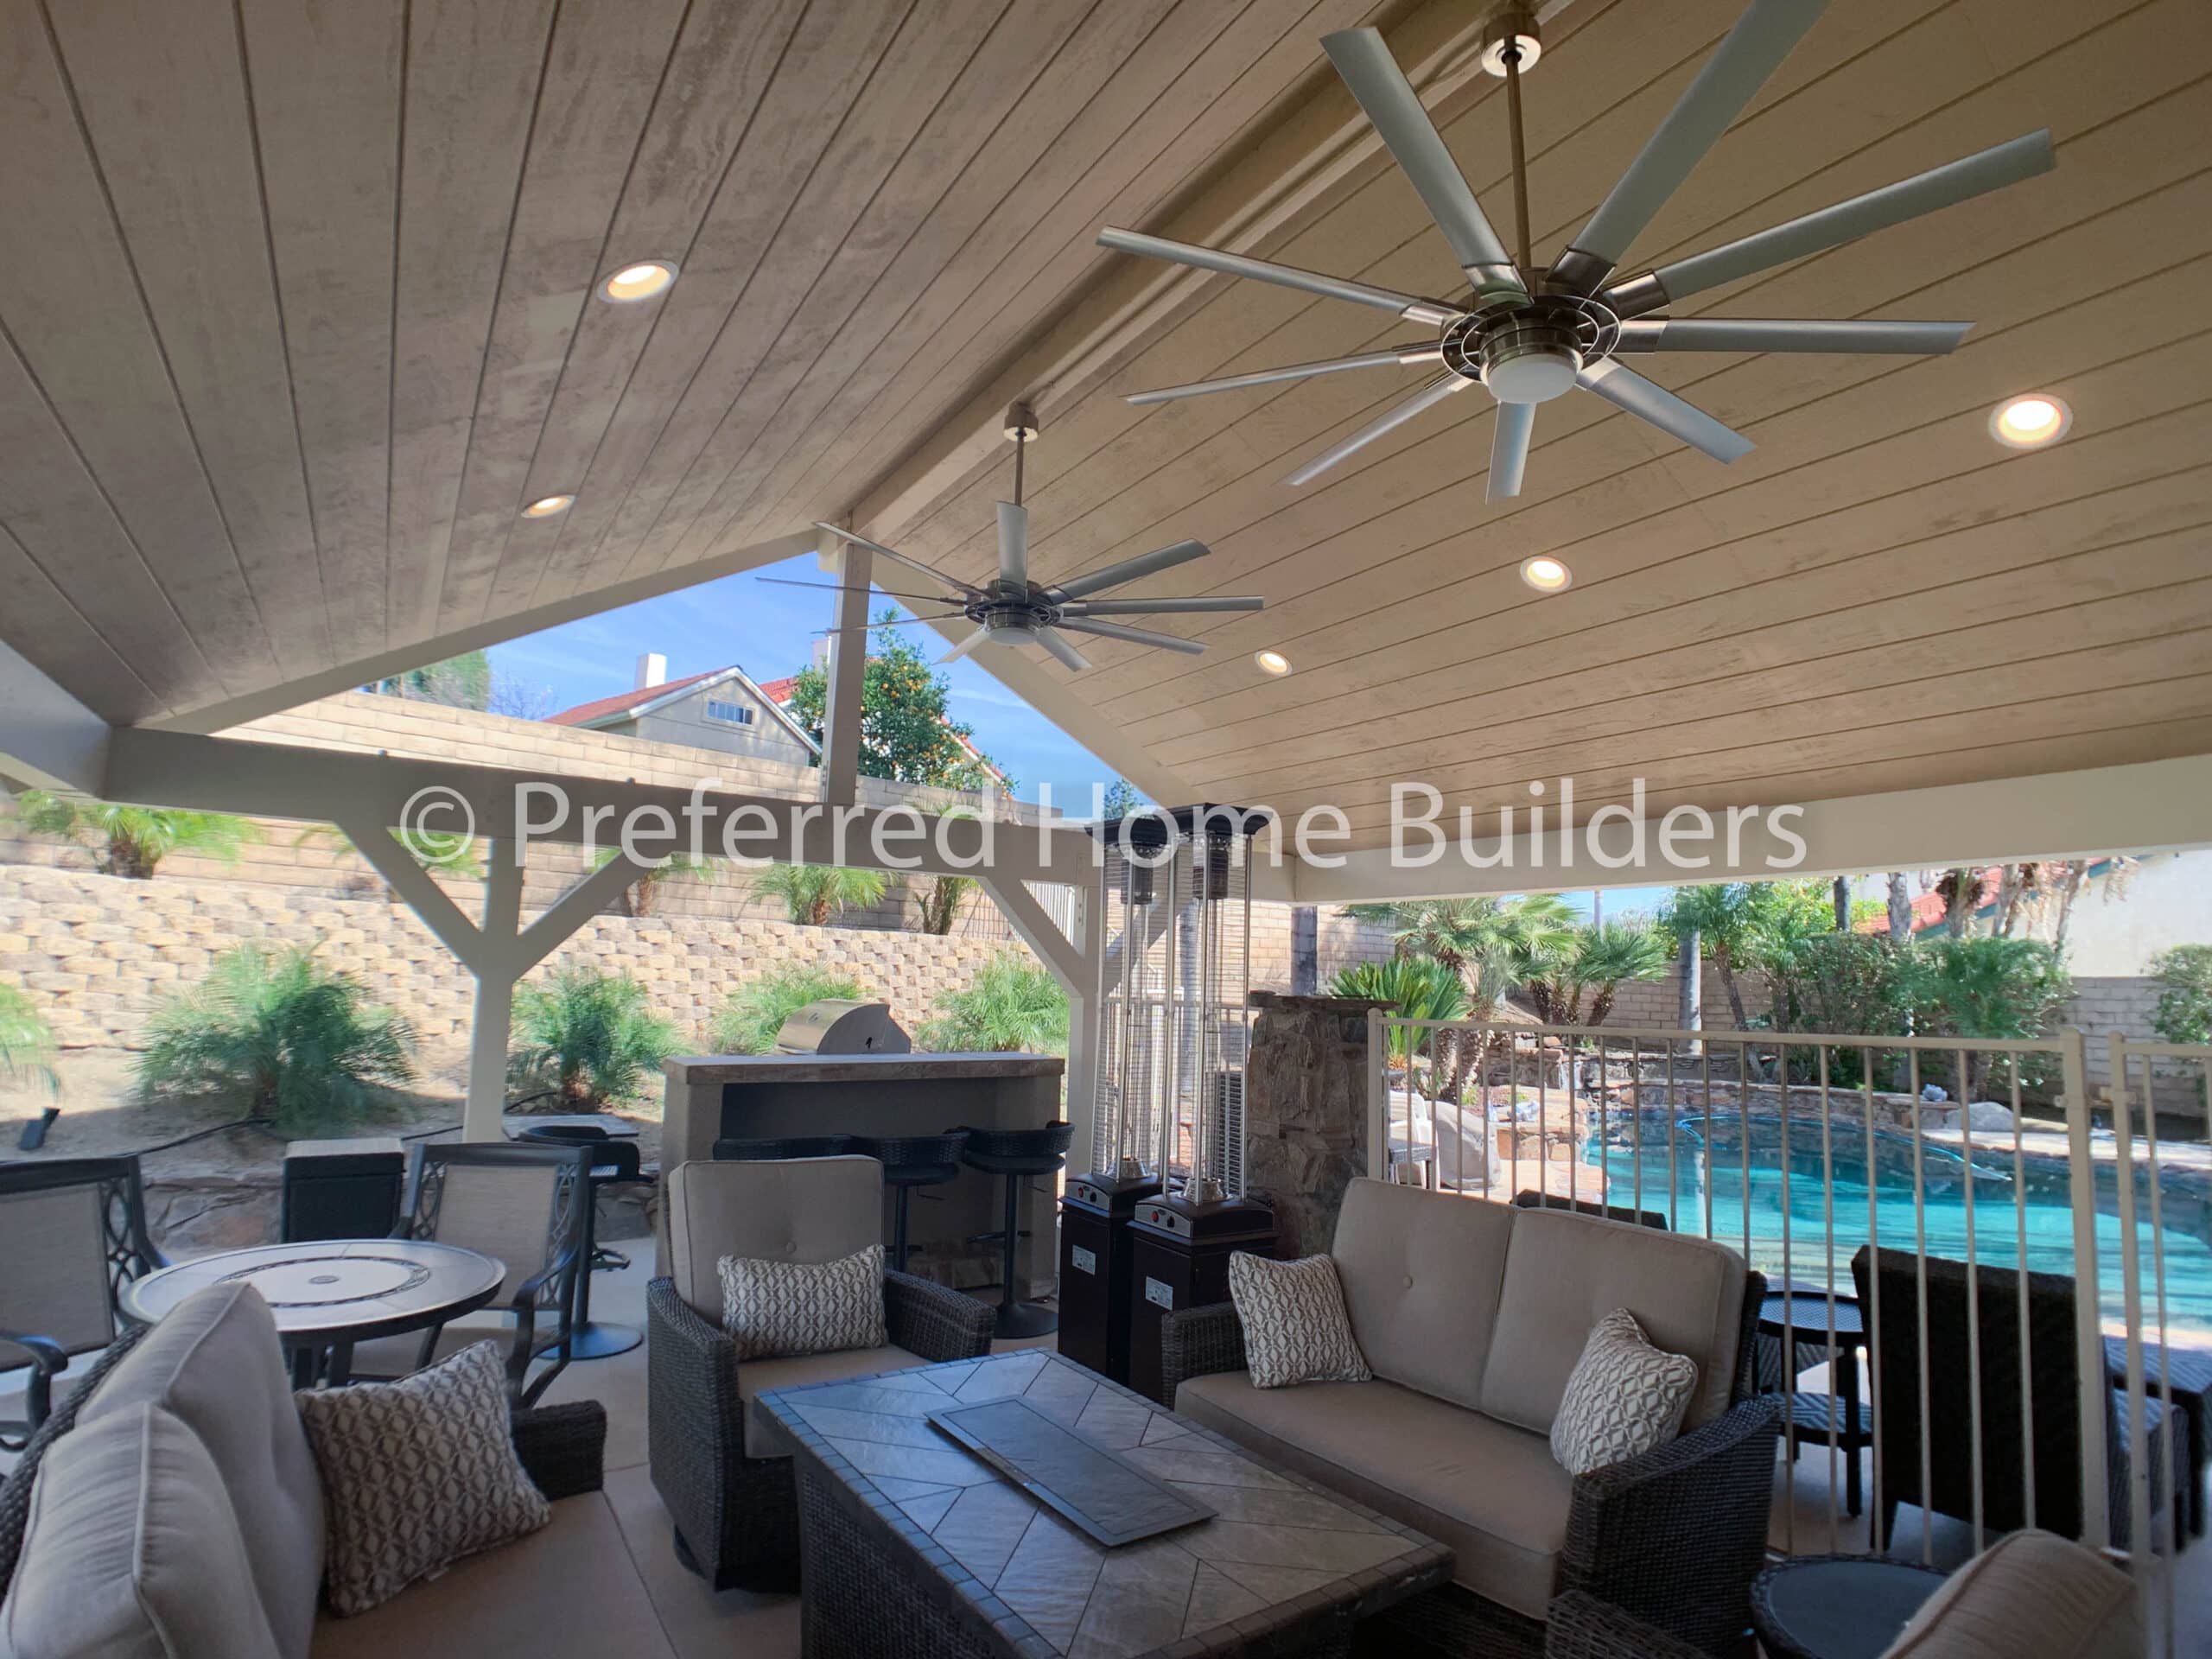 Covered Patio and Outdoor Kitchen Simi Valley 31 scaled 1